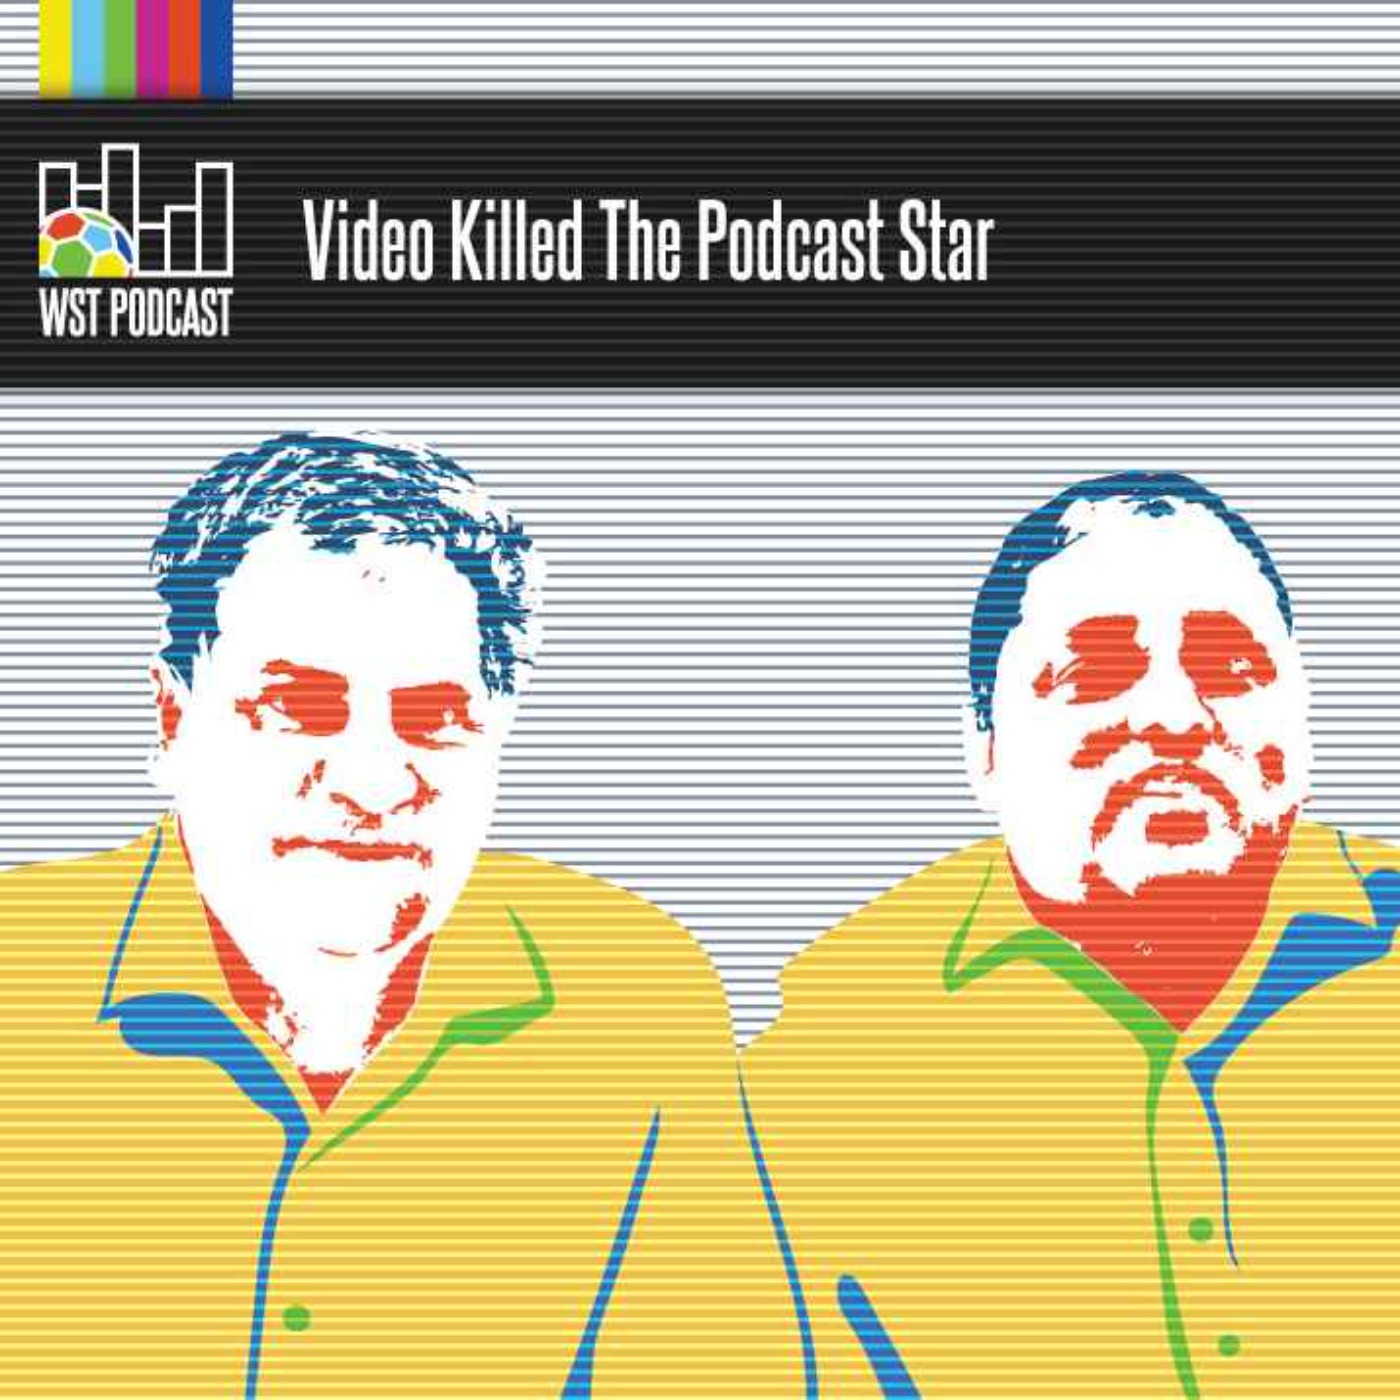 Video Killed The Podcast Star